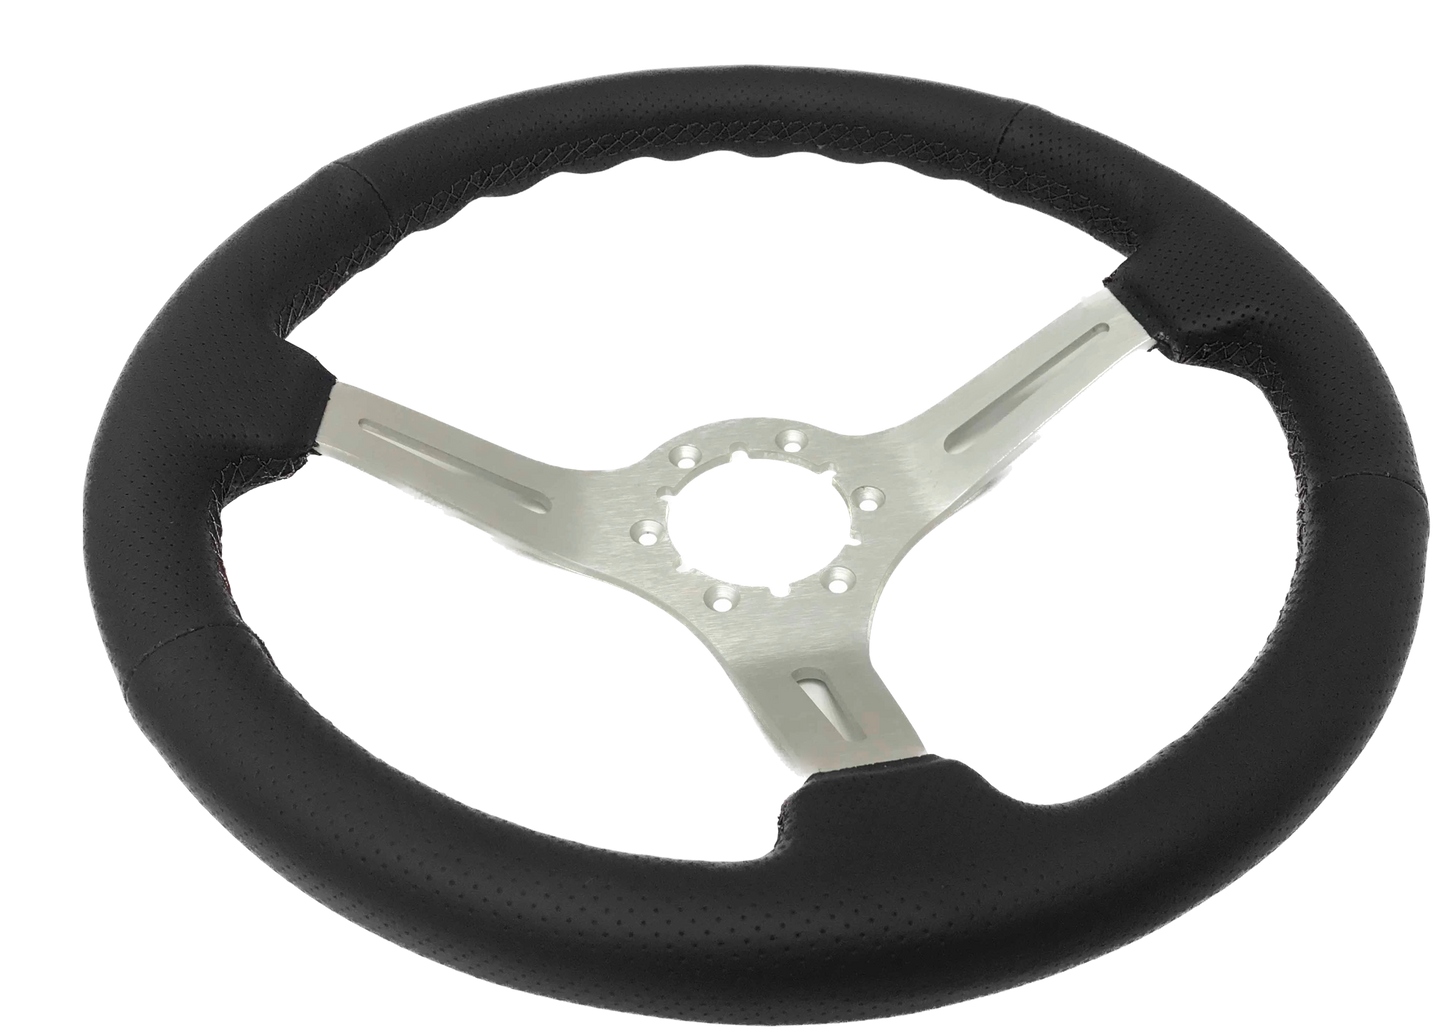 1968-78 Ford Mustang Steering Wheel Kit | Perforated Leather